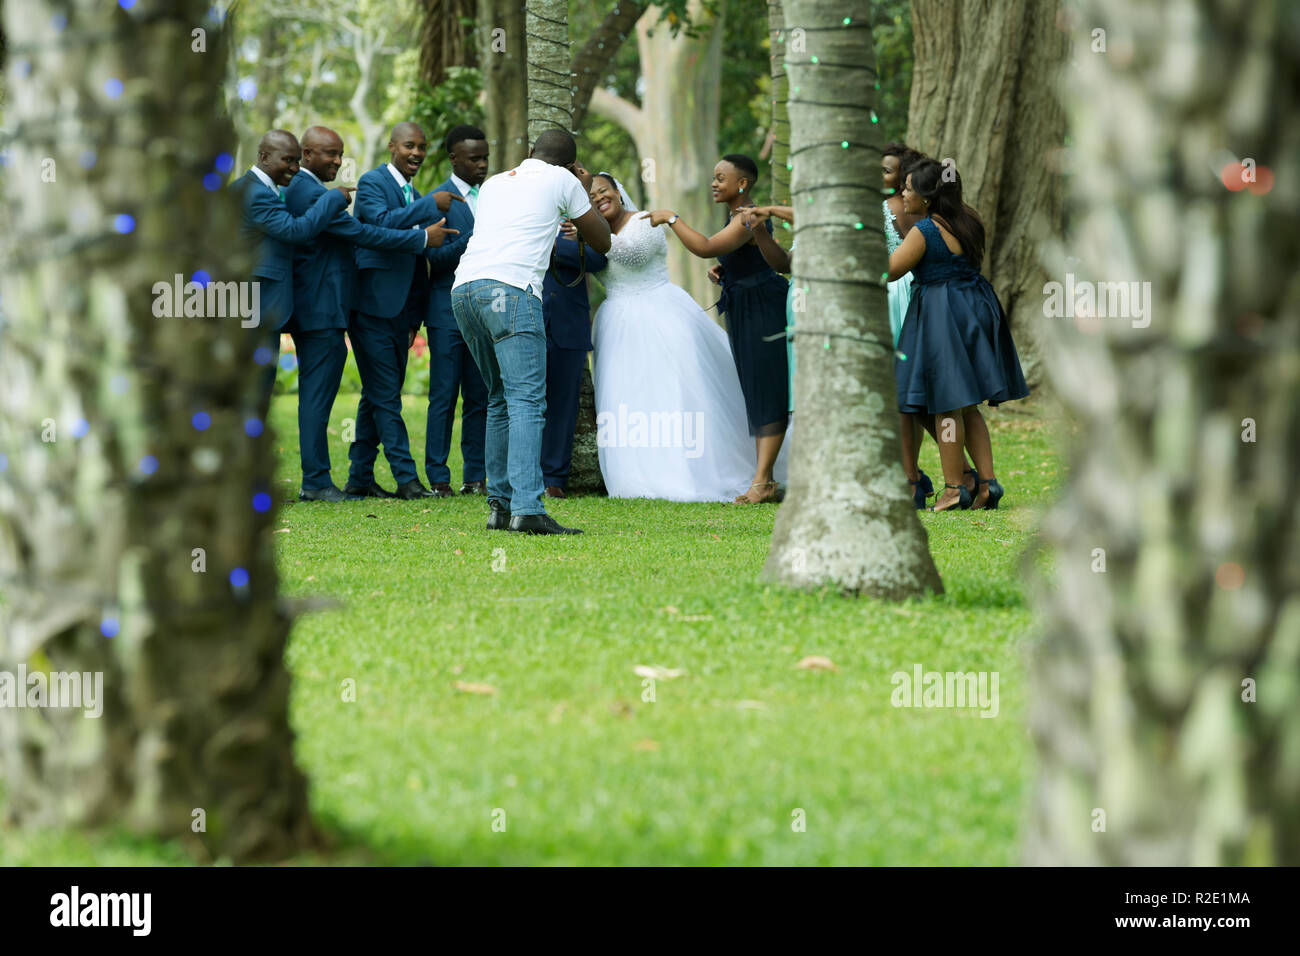 Durban, KwaZulu-Natal, South Africa ,rear view of professional wedding photographer, photographing bridal party posing for picture in Botanical Garden Stock Photo